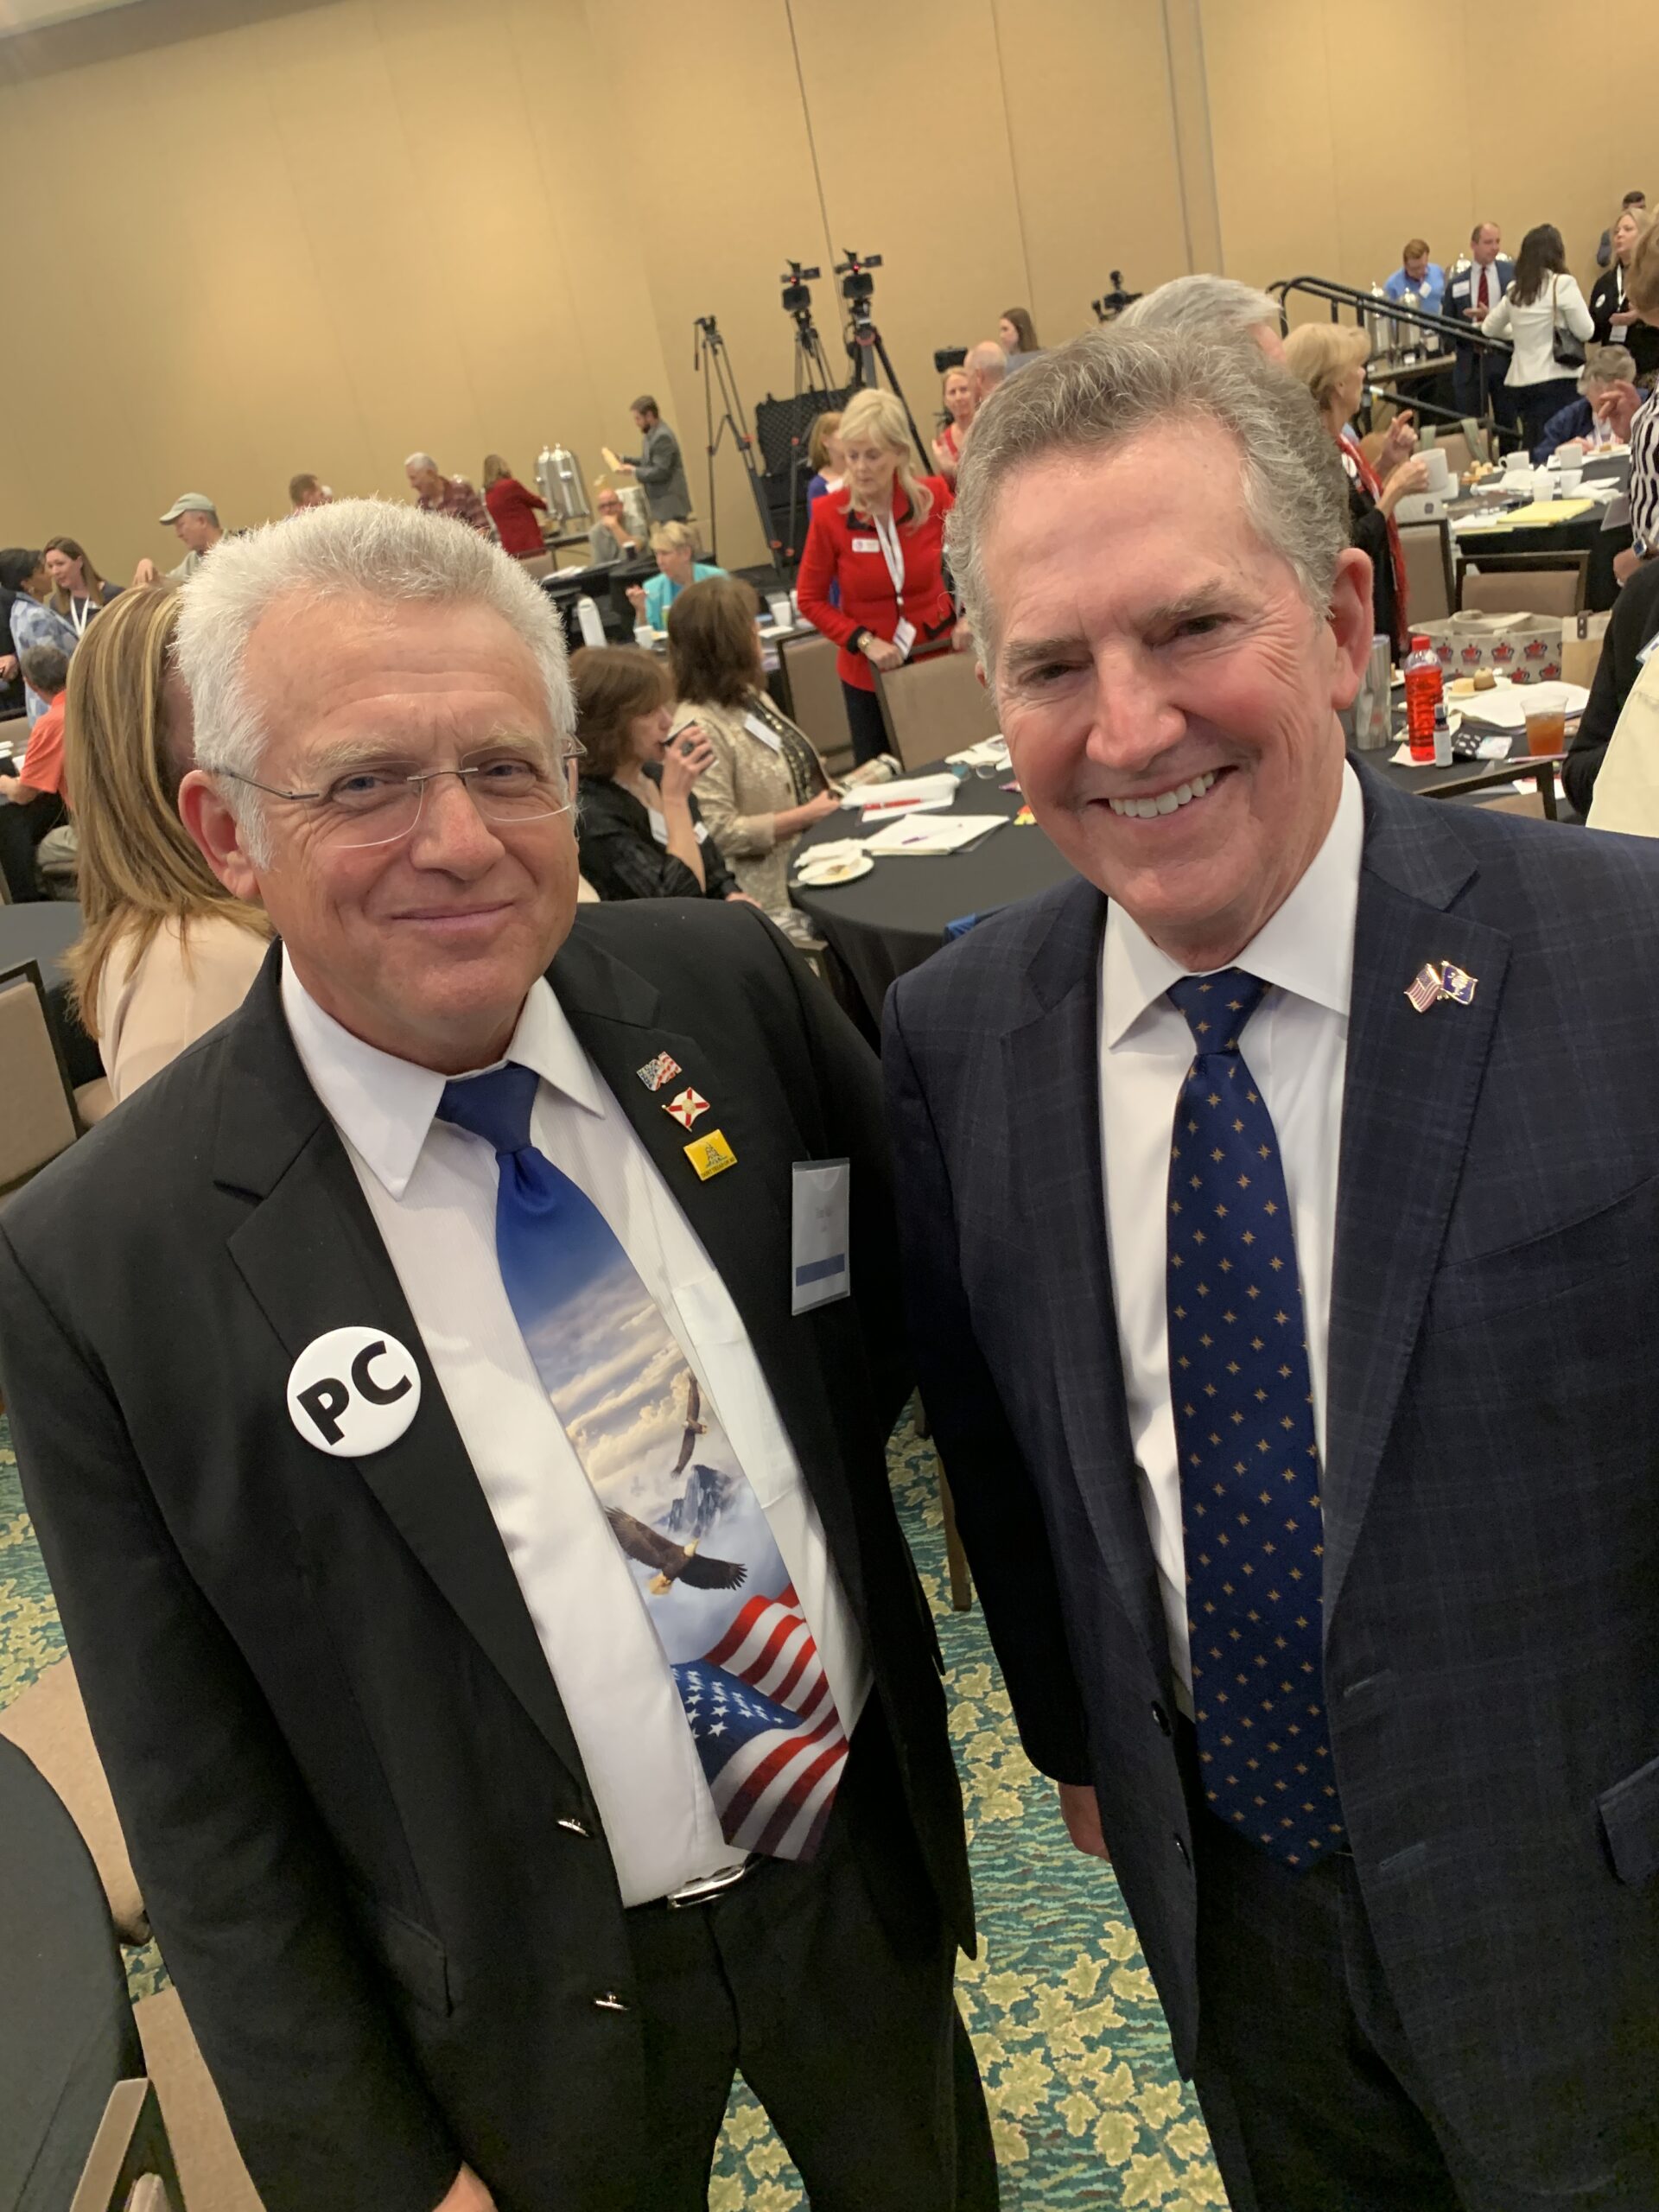 Tom Vail with Jim DeMint at Election Integrity Summit in Orlando, June 2022